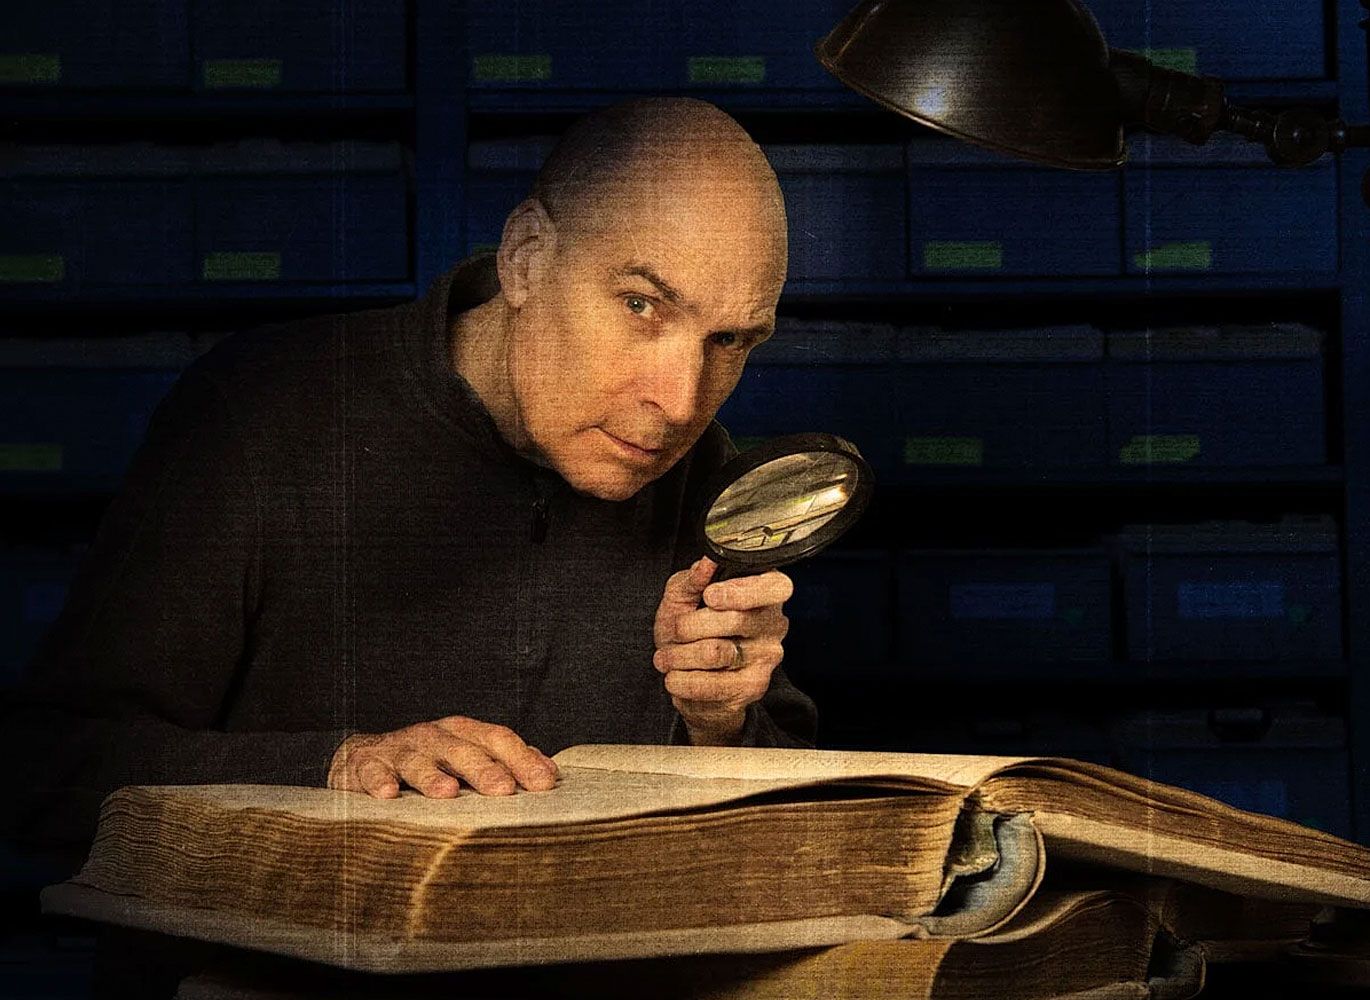 Geoffrey Baer with a magnifying glass.